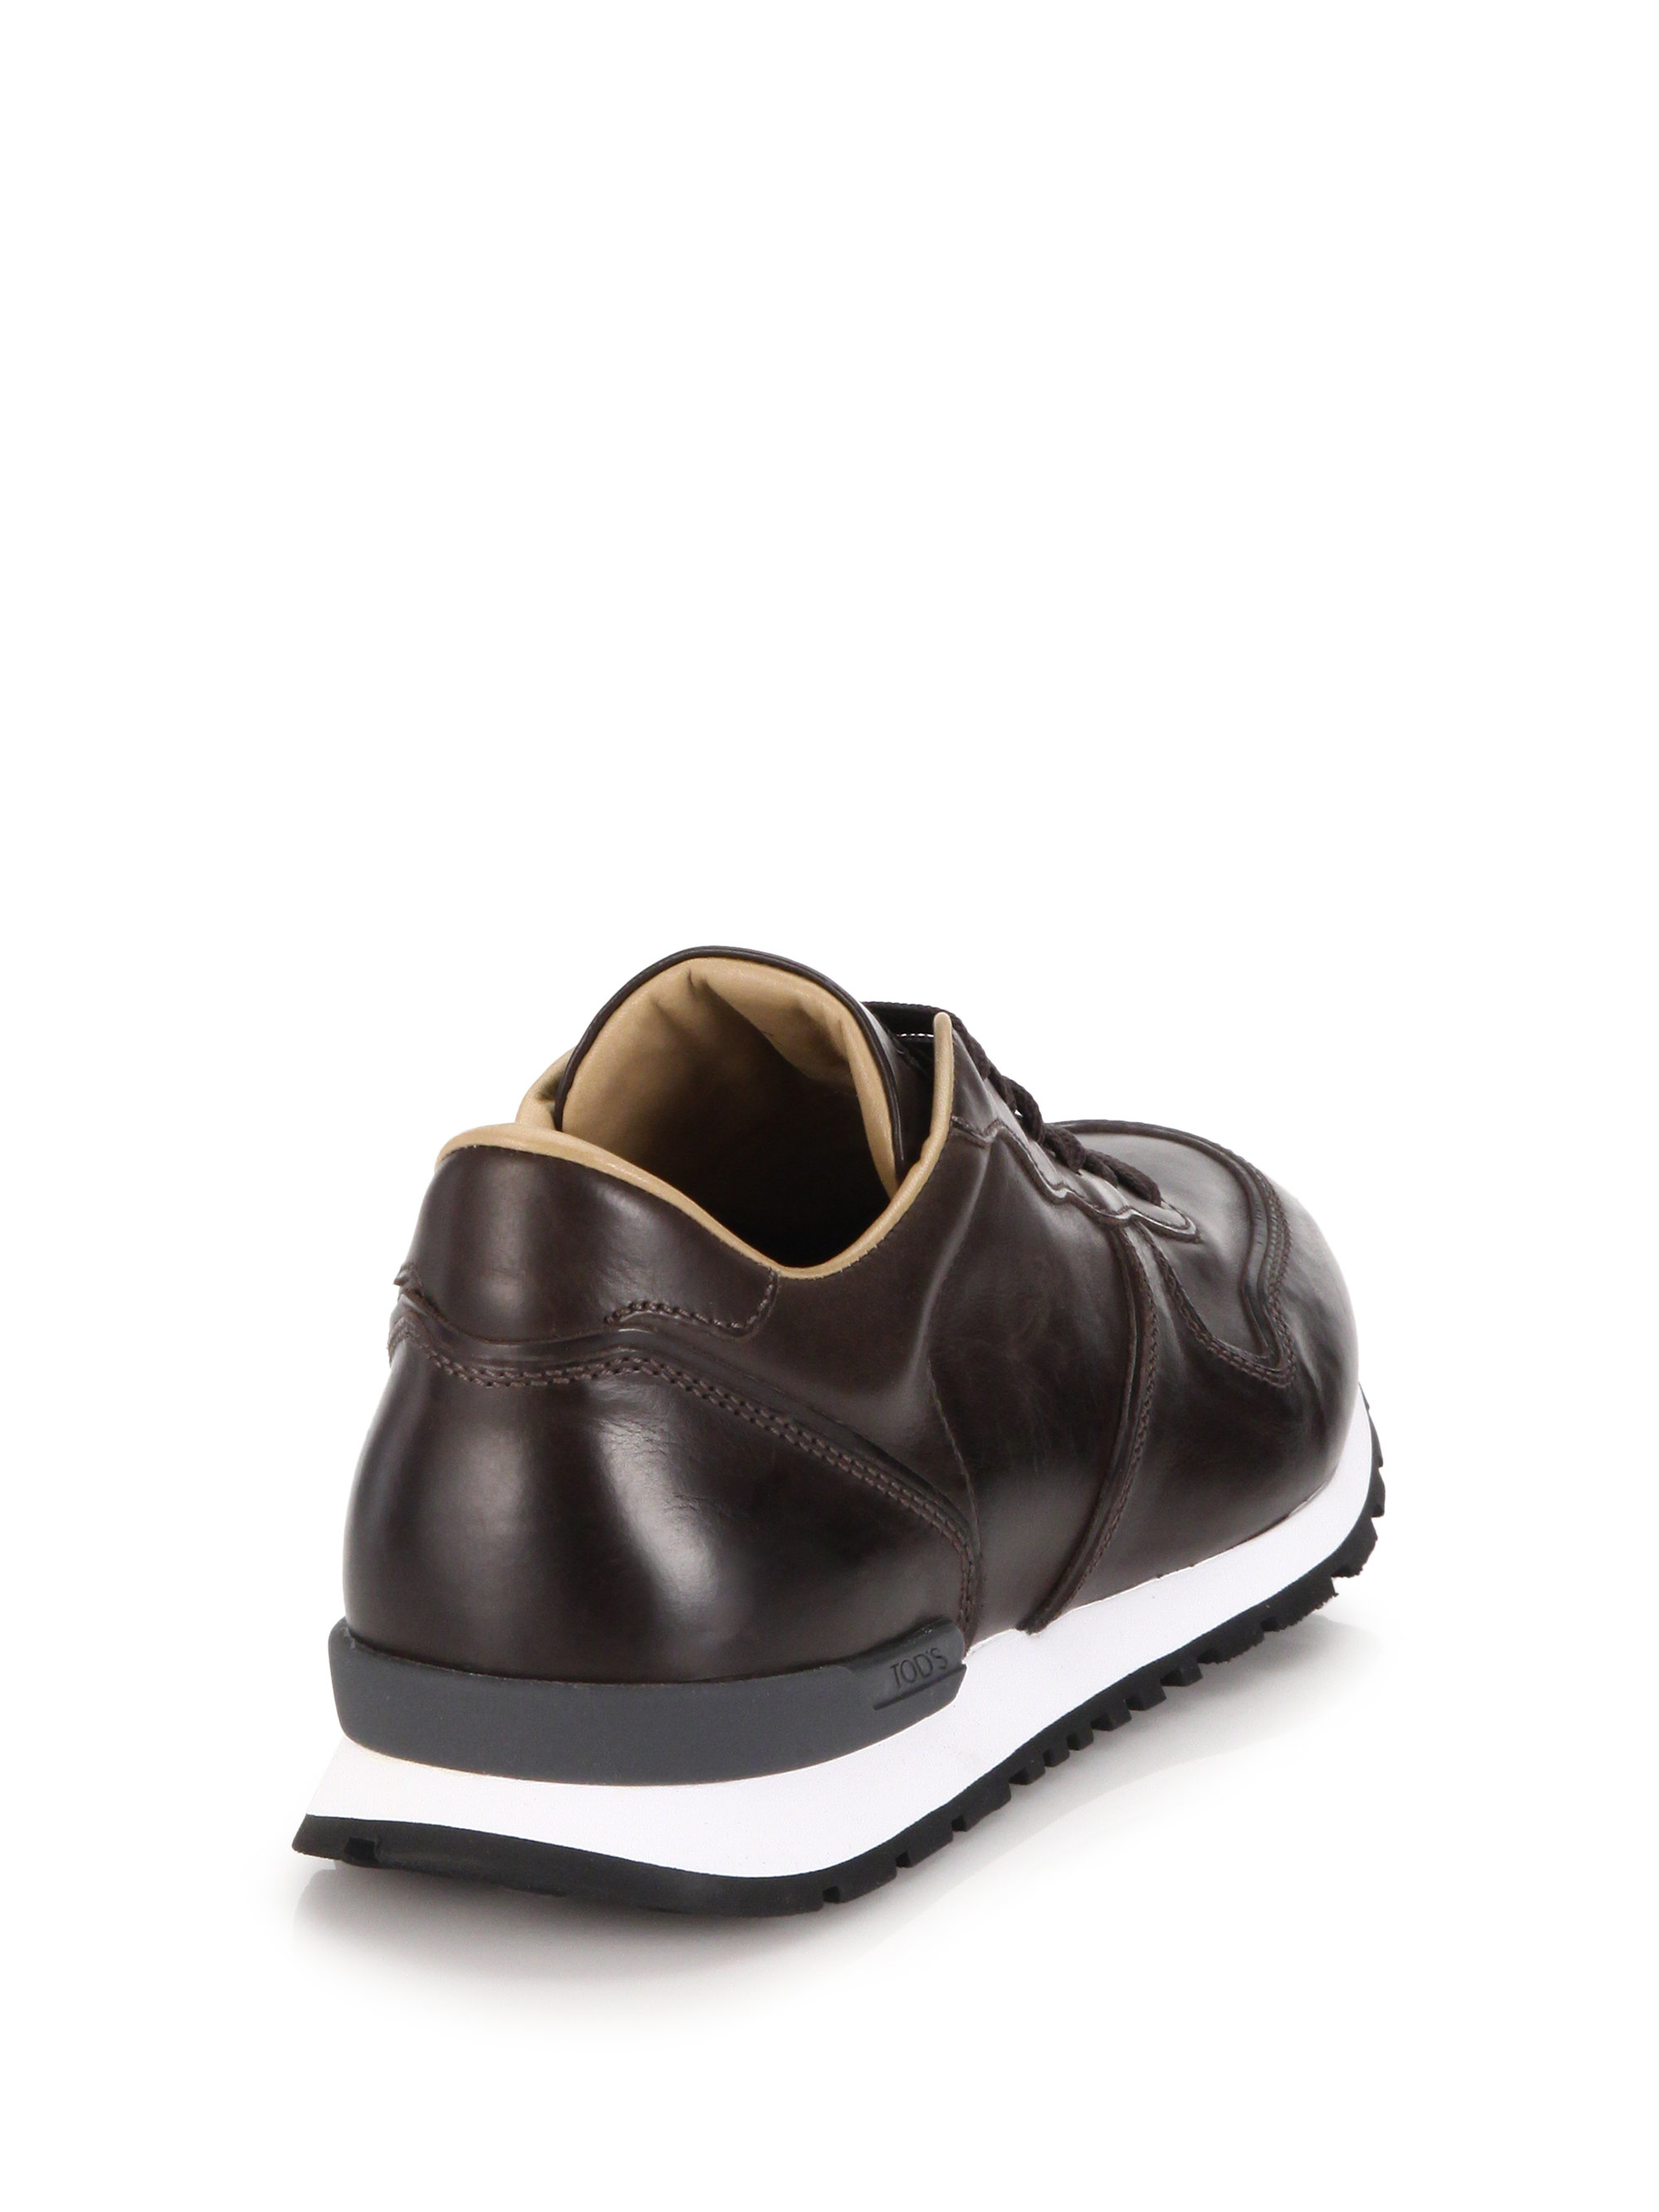 Tod's Leather Sneakers in Dark Brown 